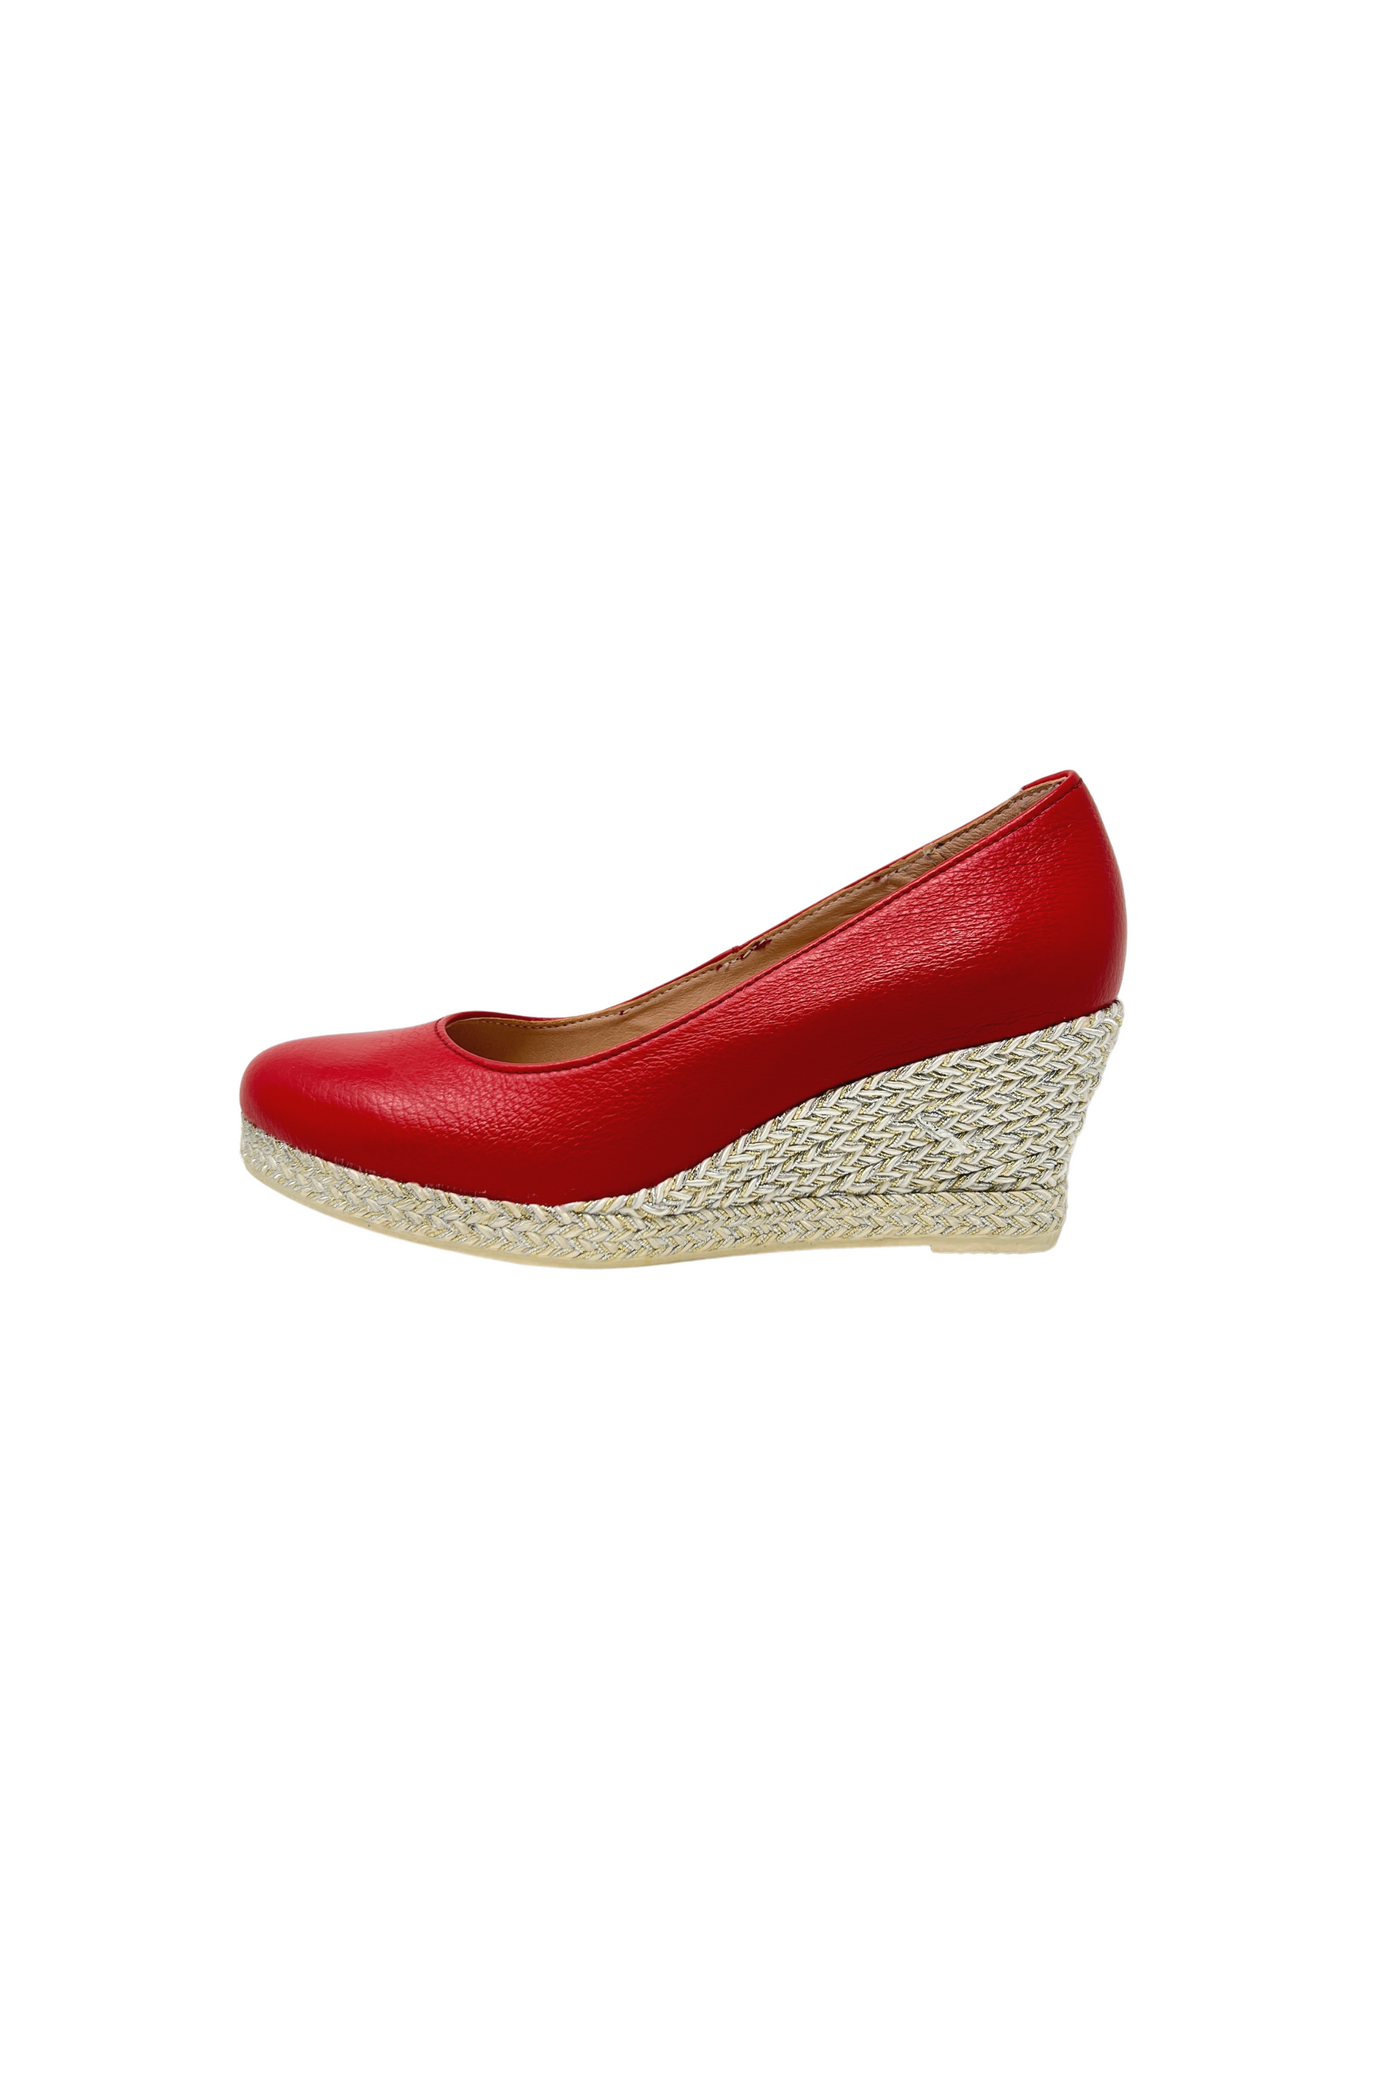 Red Wedge Shoe